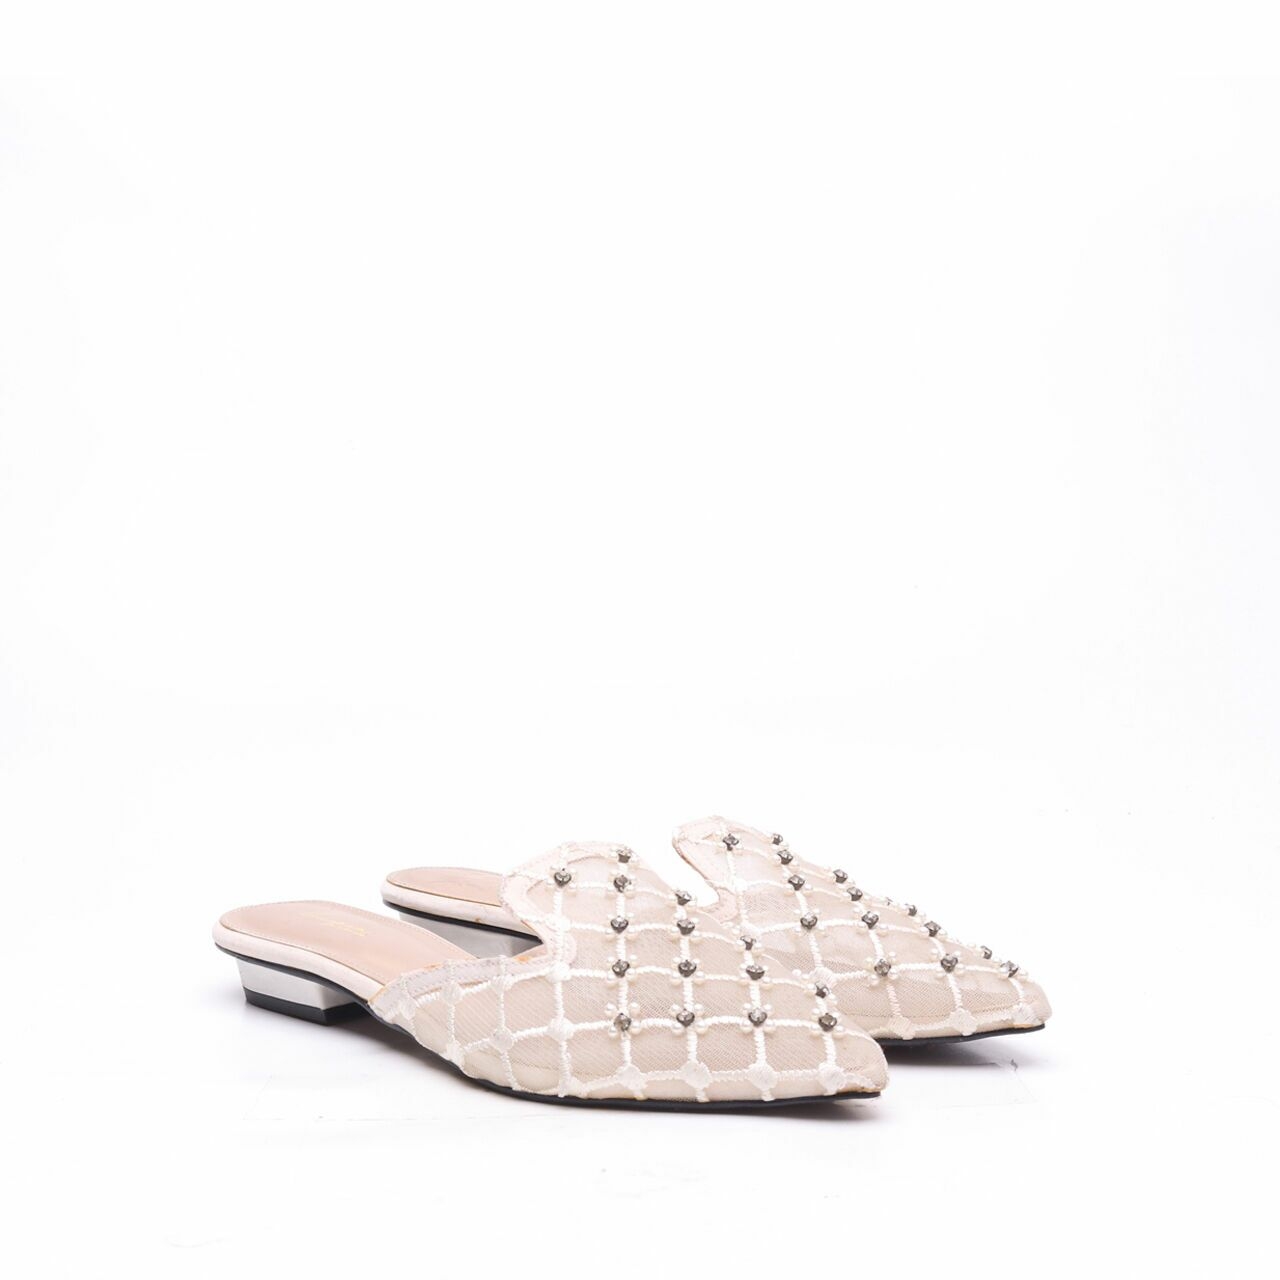 Langkah by Lina Lee White Embellished Lace Mules